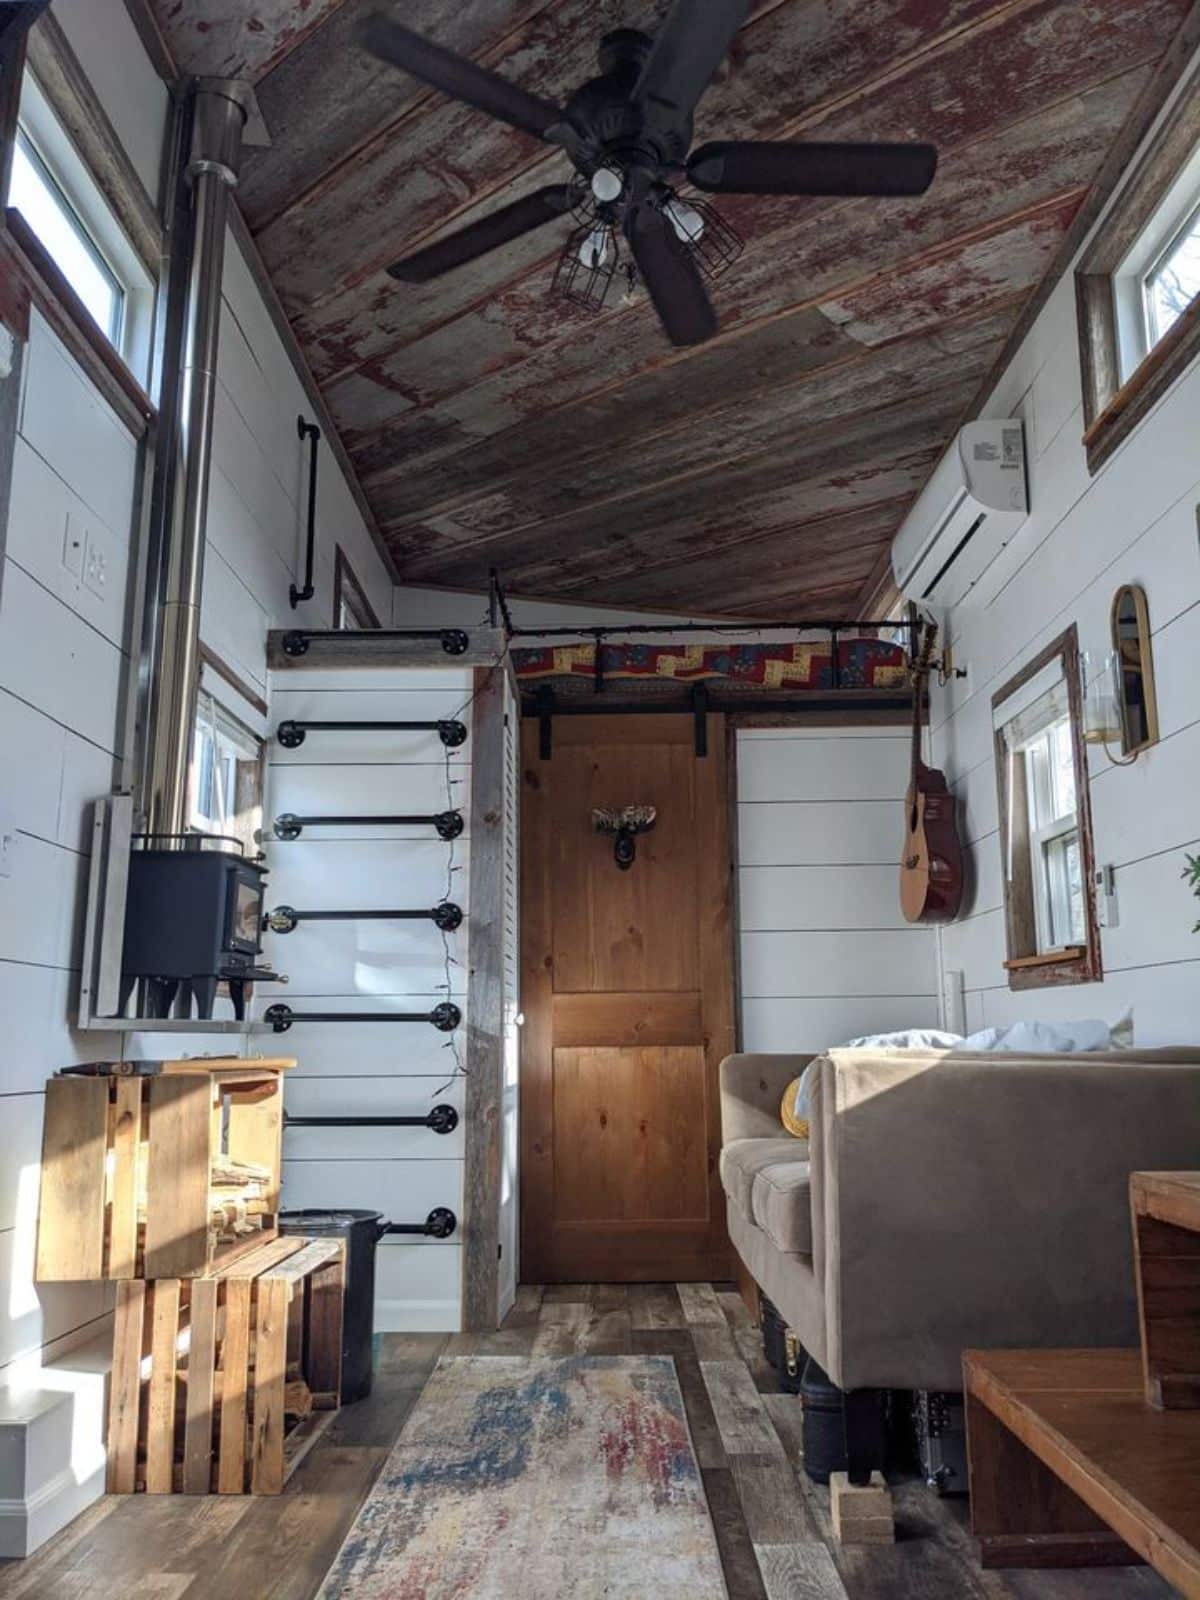 living area of 24' fully furnished tiny home